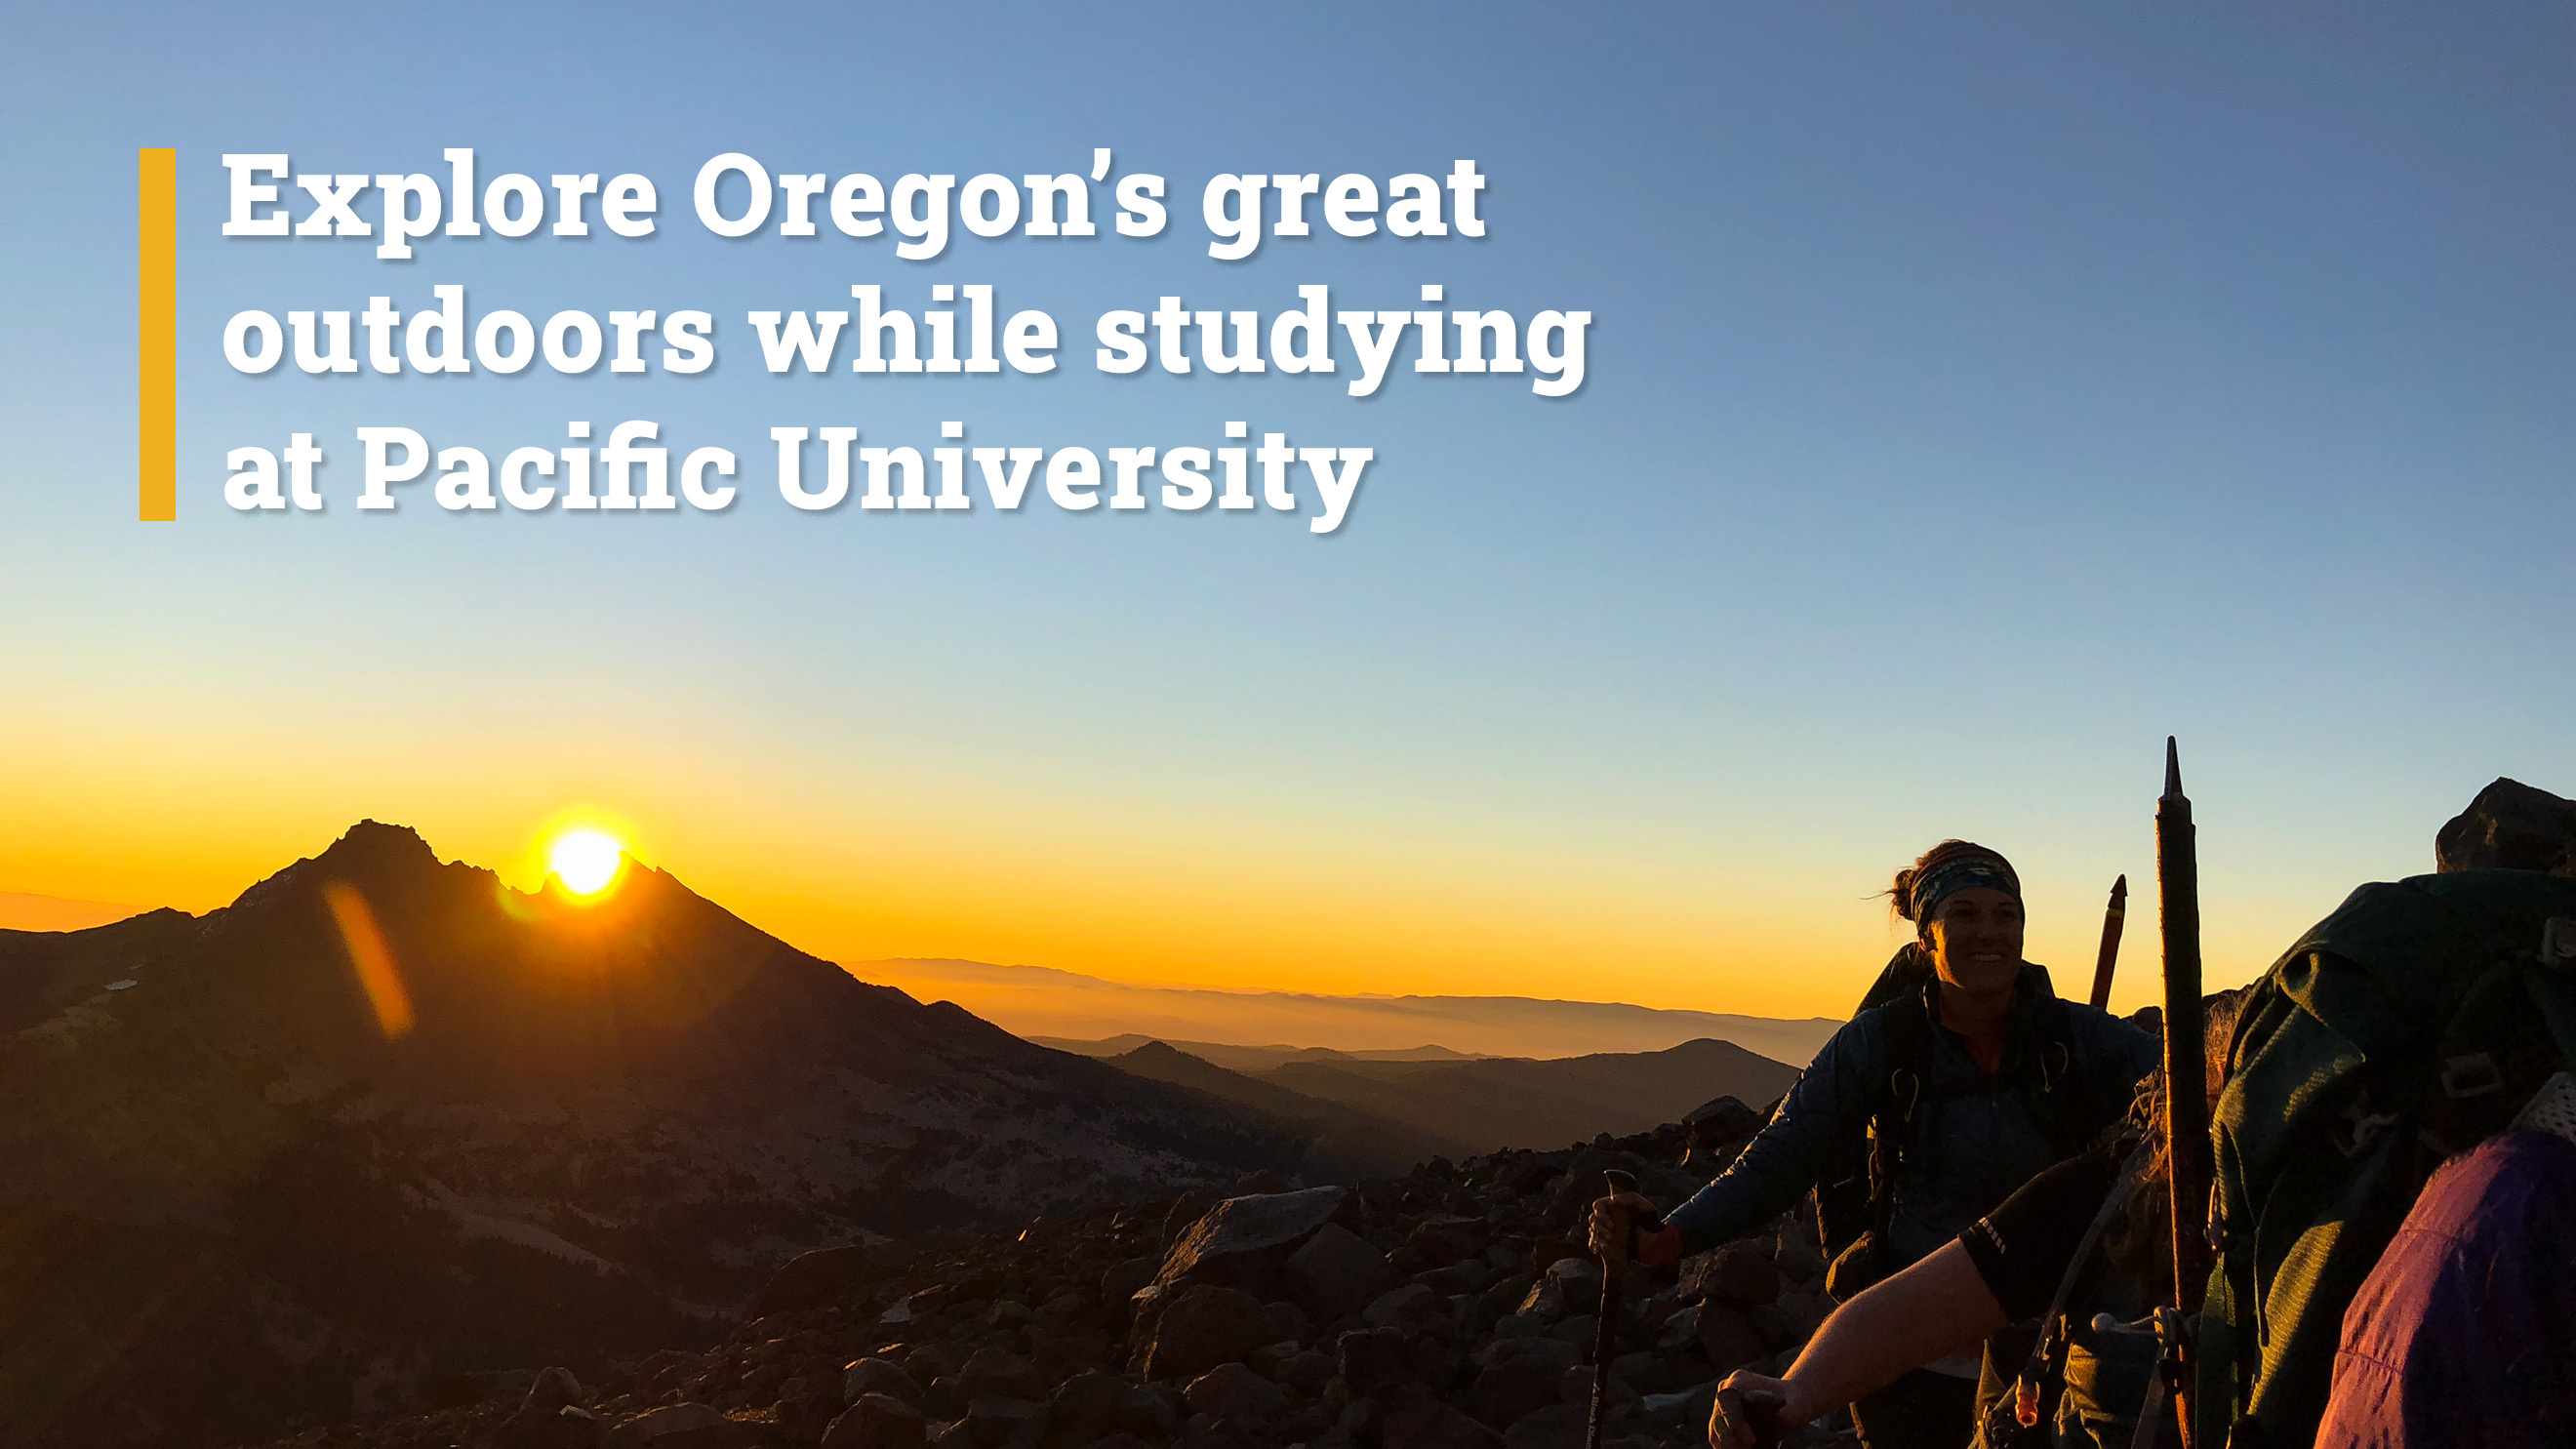 Explore Oregon's great outdoors while studying at Pacific University